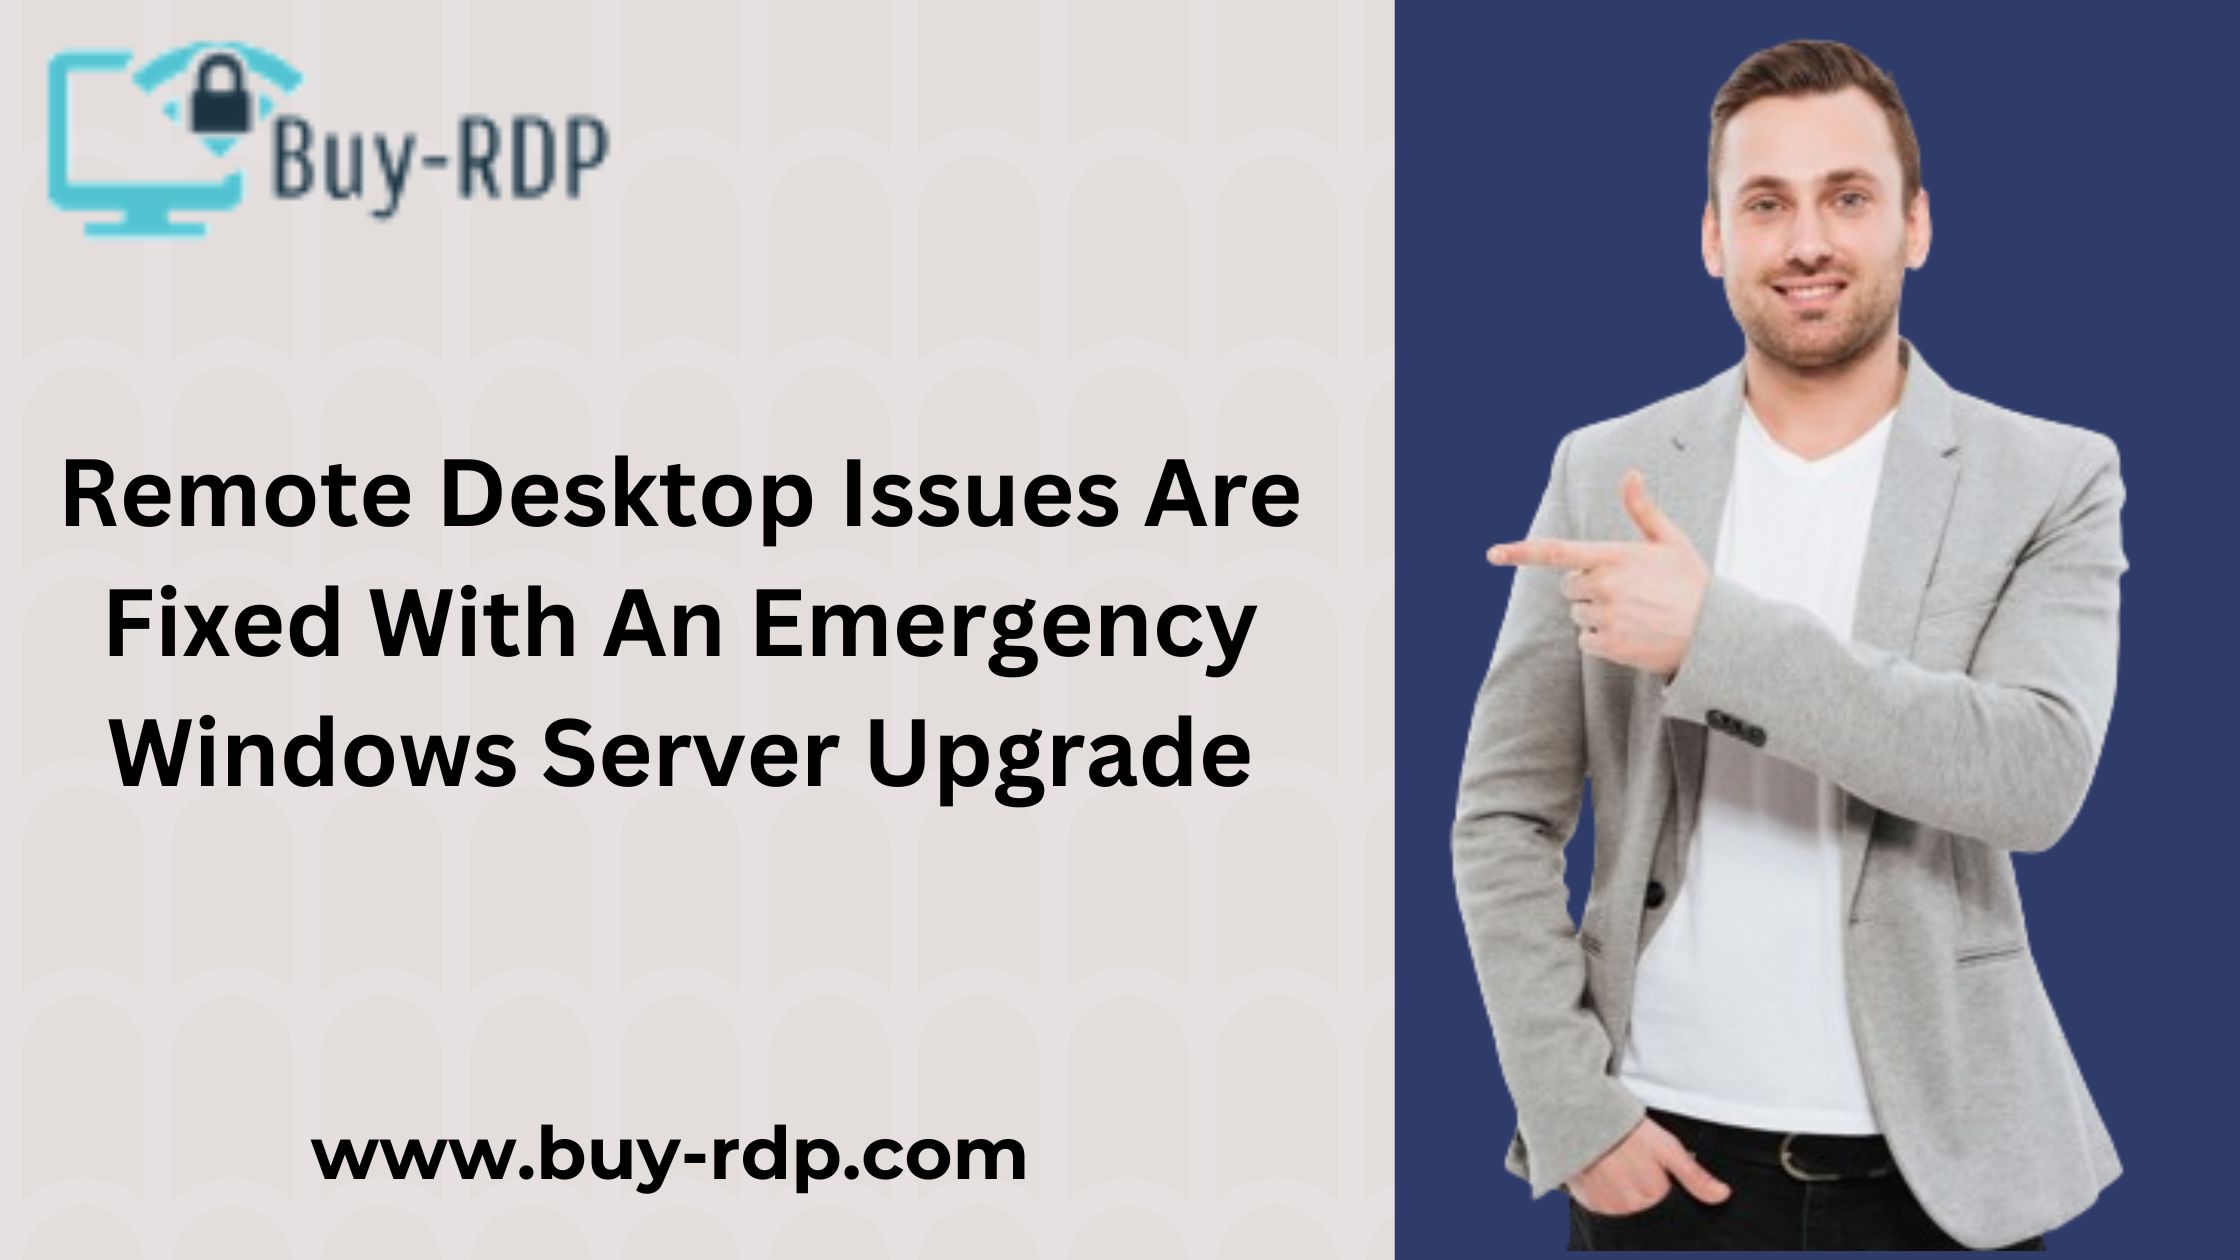 Remote Desktop Issues Are Fixed With An Emergency Windows Server Upgrade